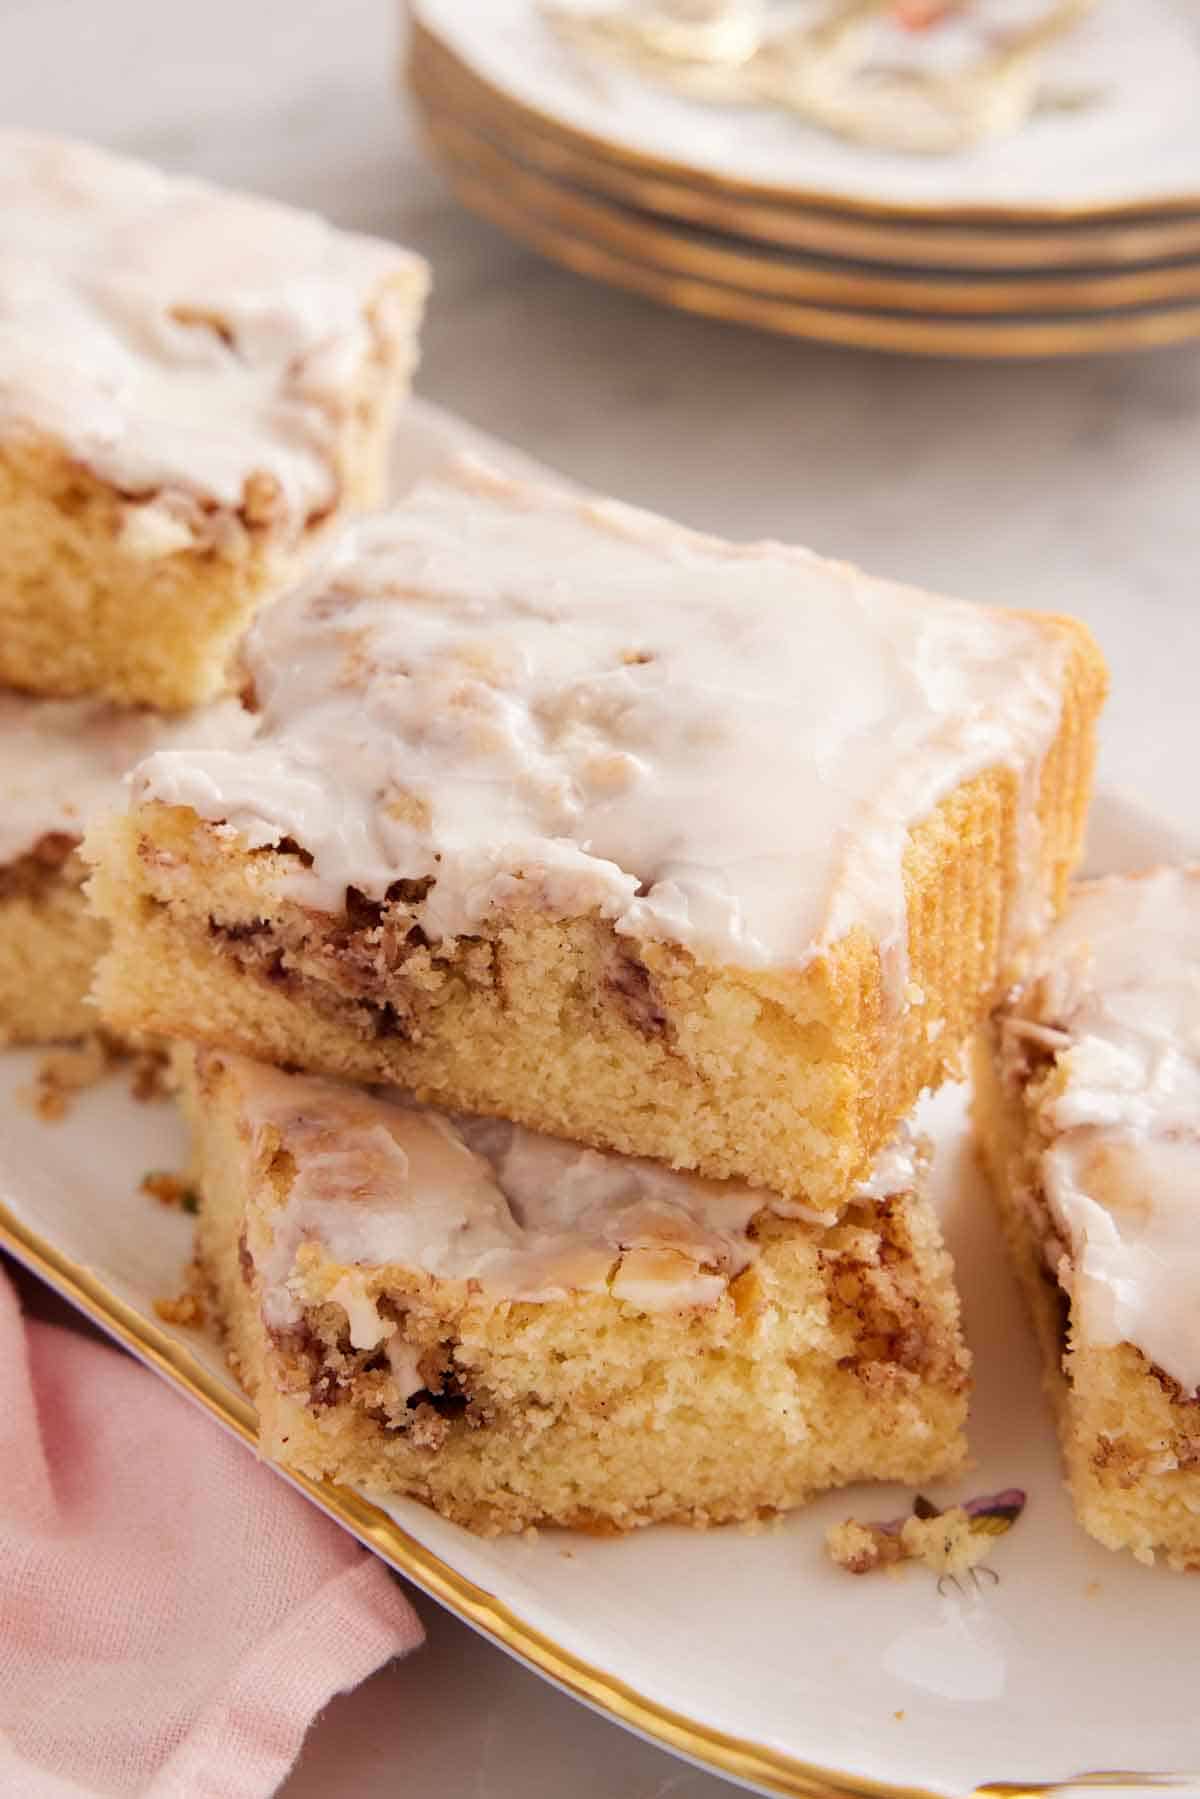 A close up view of a stack of two slices cinnamon roll cake on a platter.